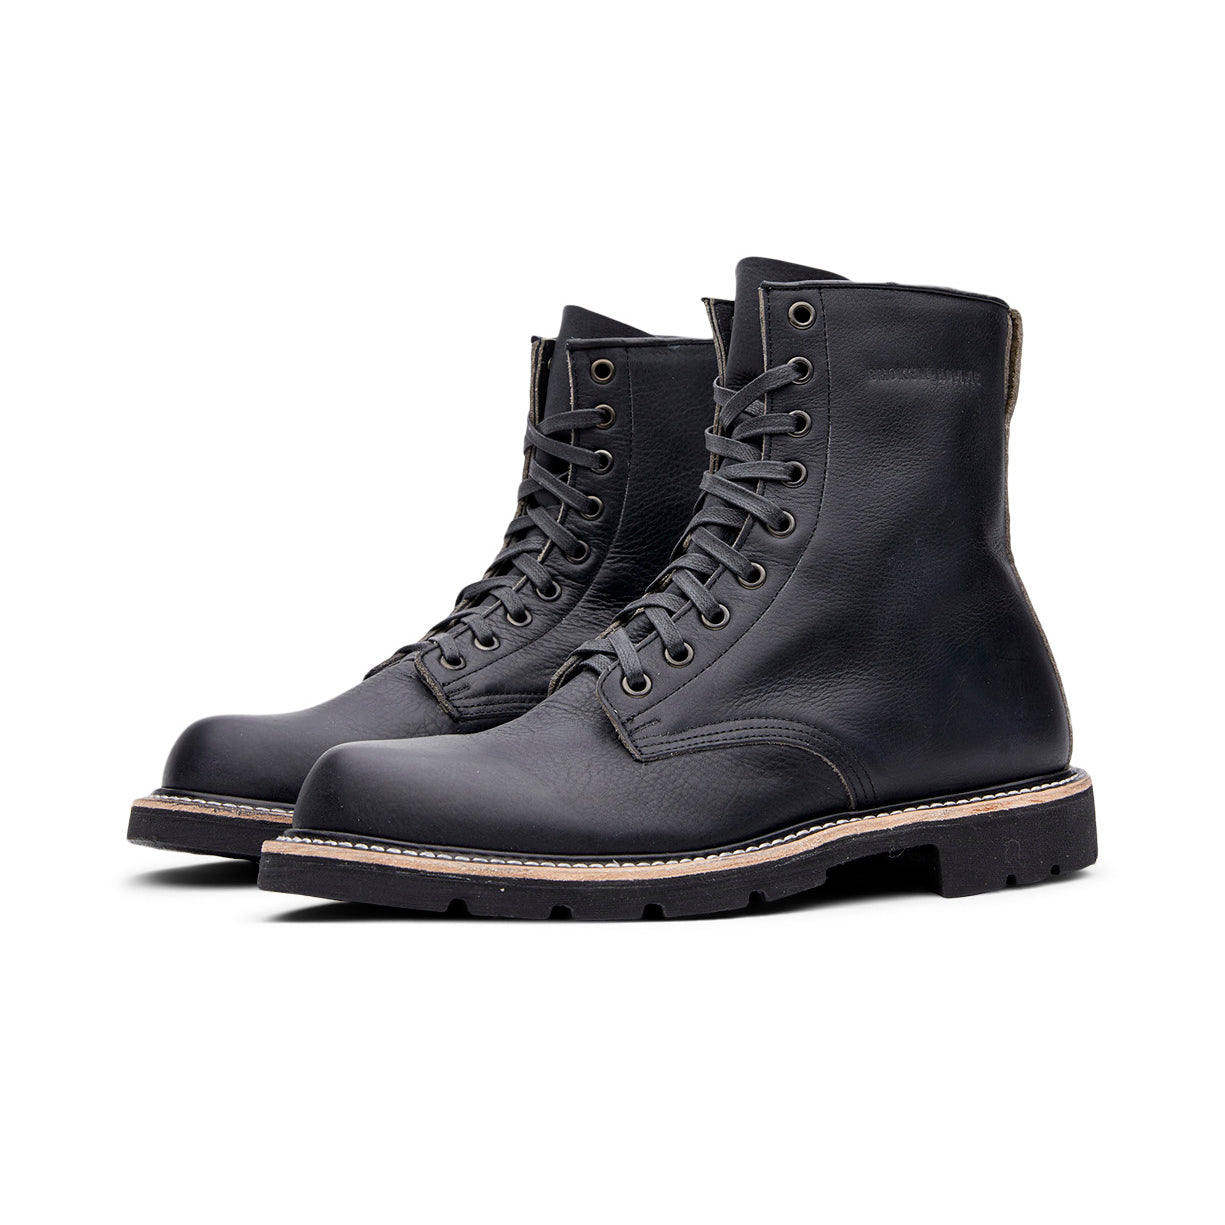 A pair of Jacob boots from Broken Homme, with a rubber sole, made in the USA.